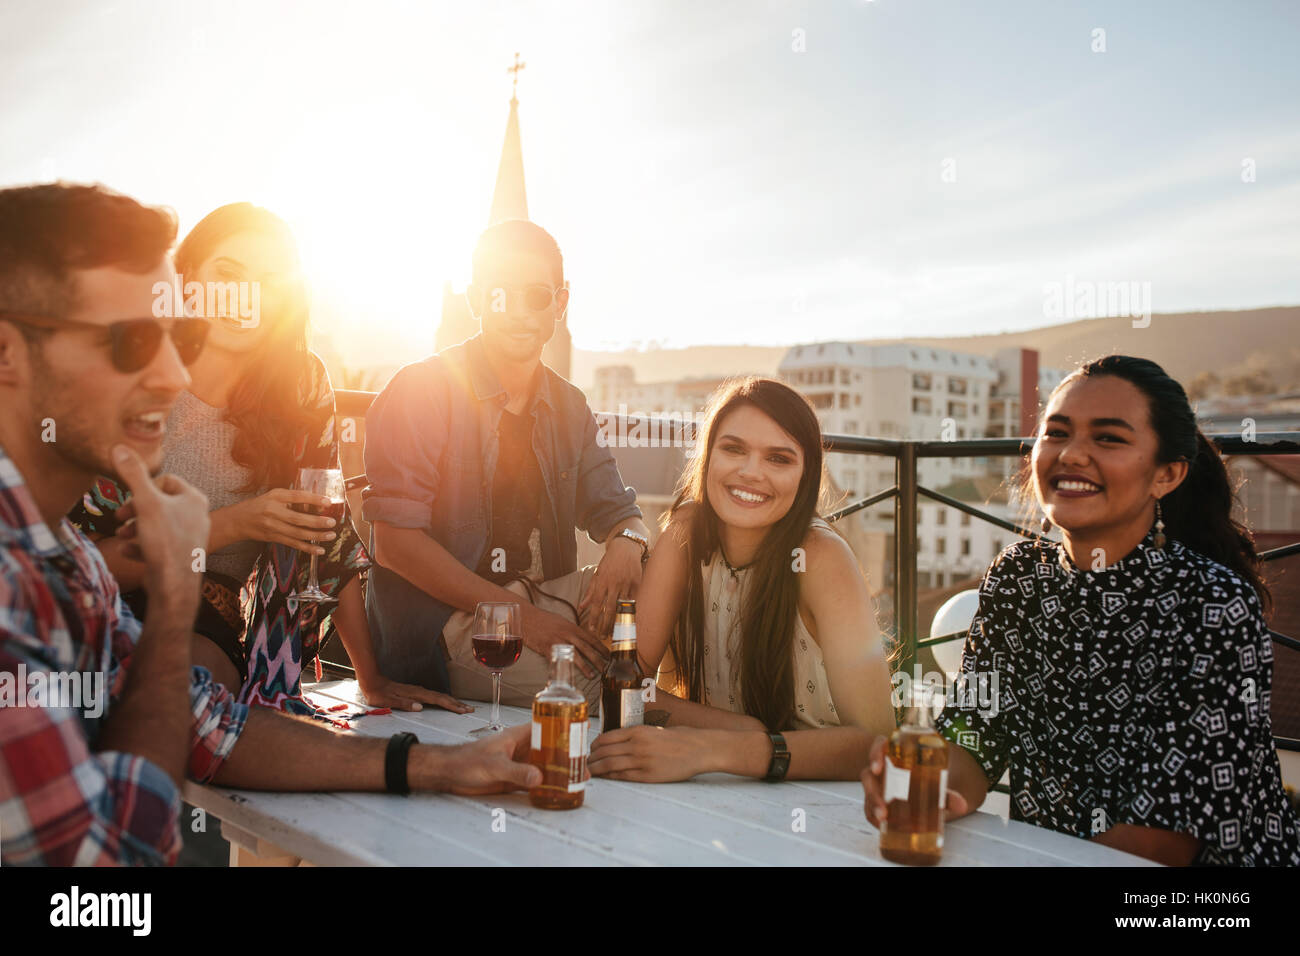 Group of happy young people having a rooftop party. Friends enjoying party with drinks. Stock Photo